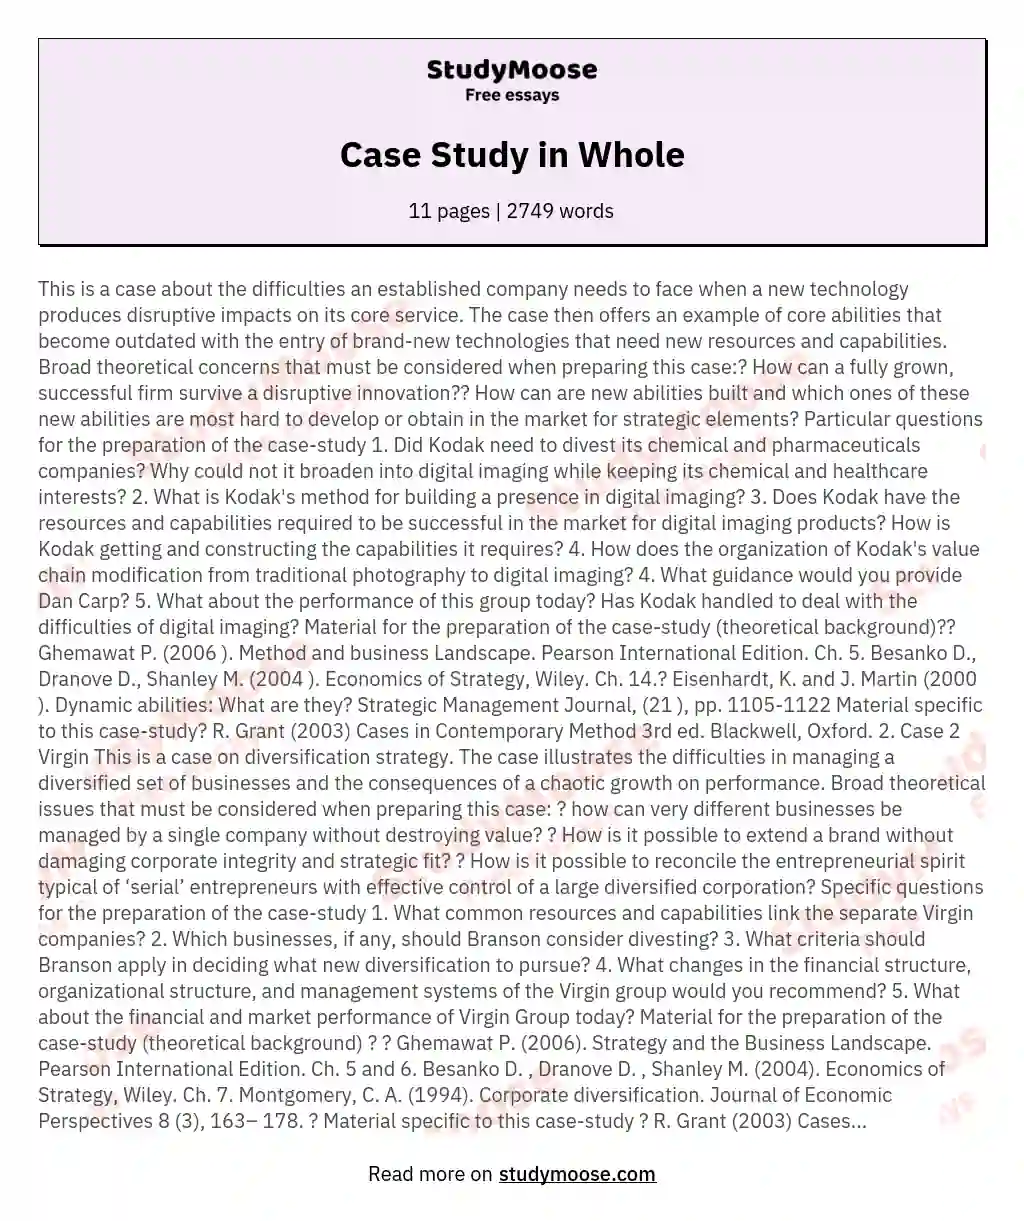 Case Study in Whole essay